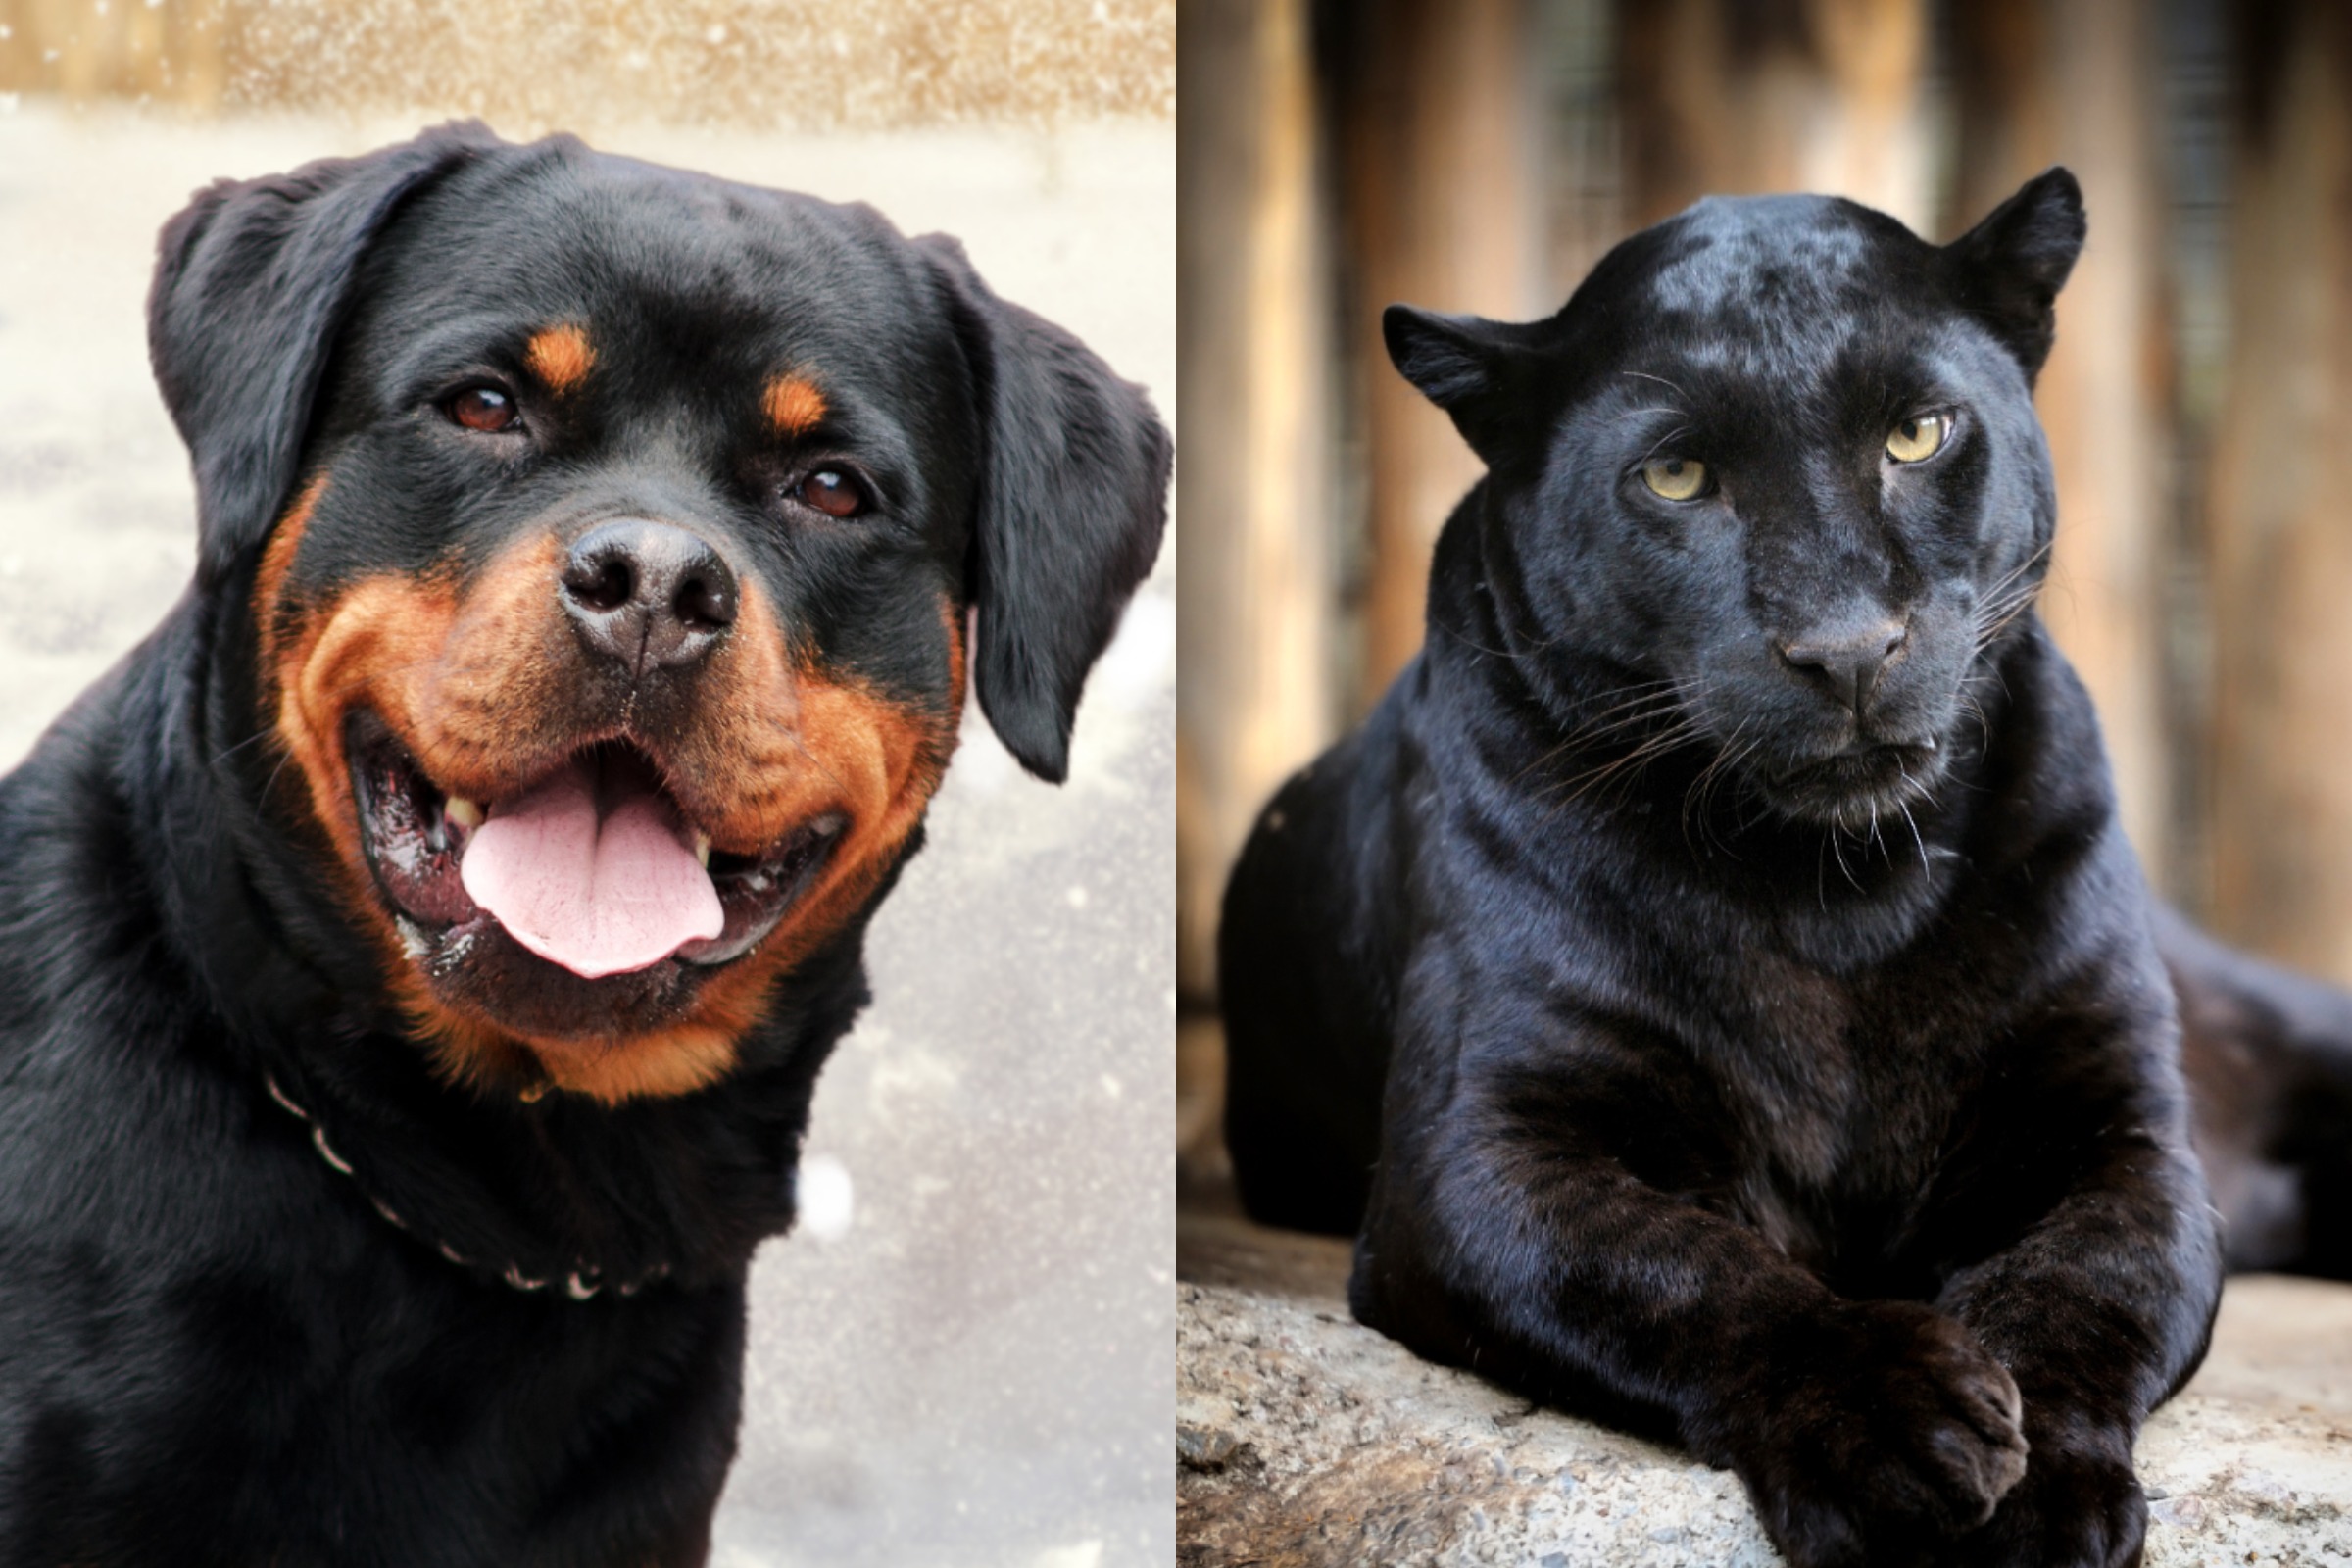 Panther and Rottweiler Become Best Friends After Woman Rescues Wild Cat From Zoo